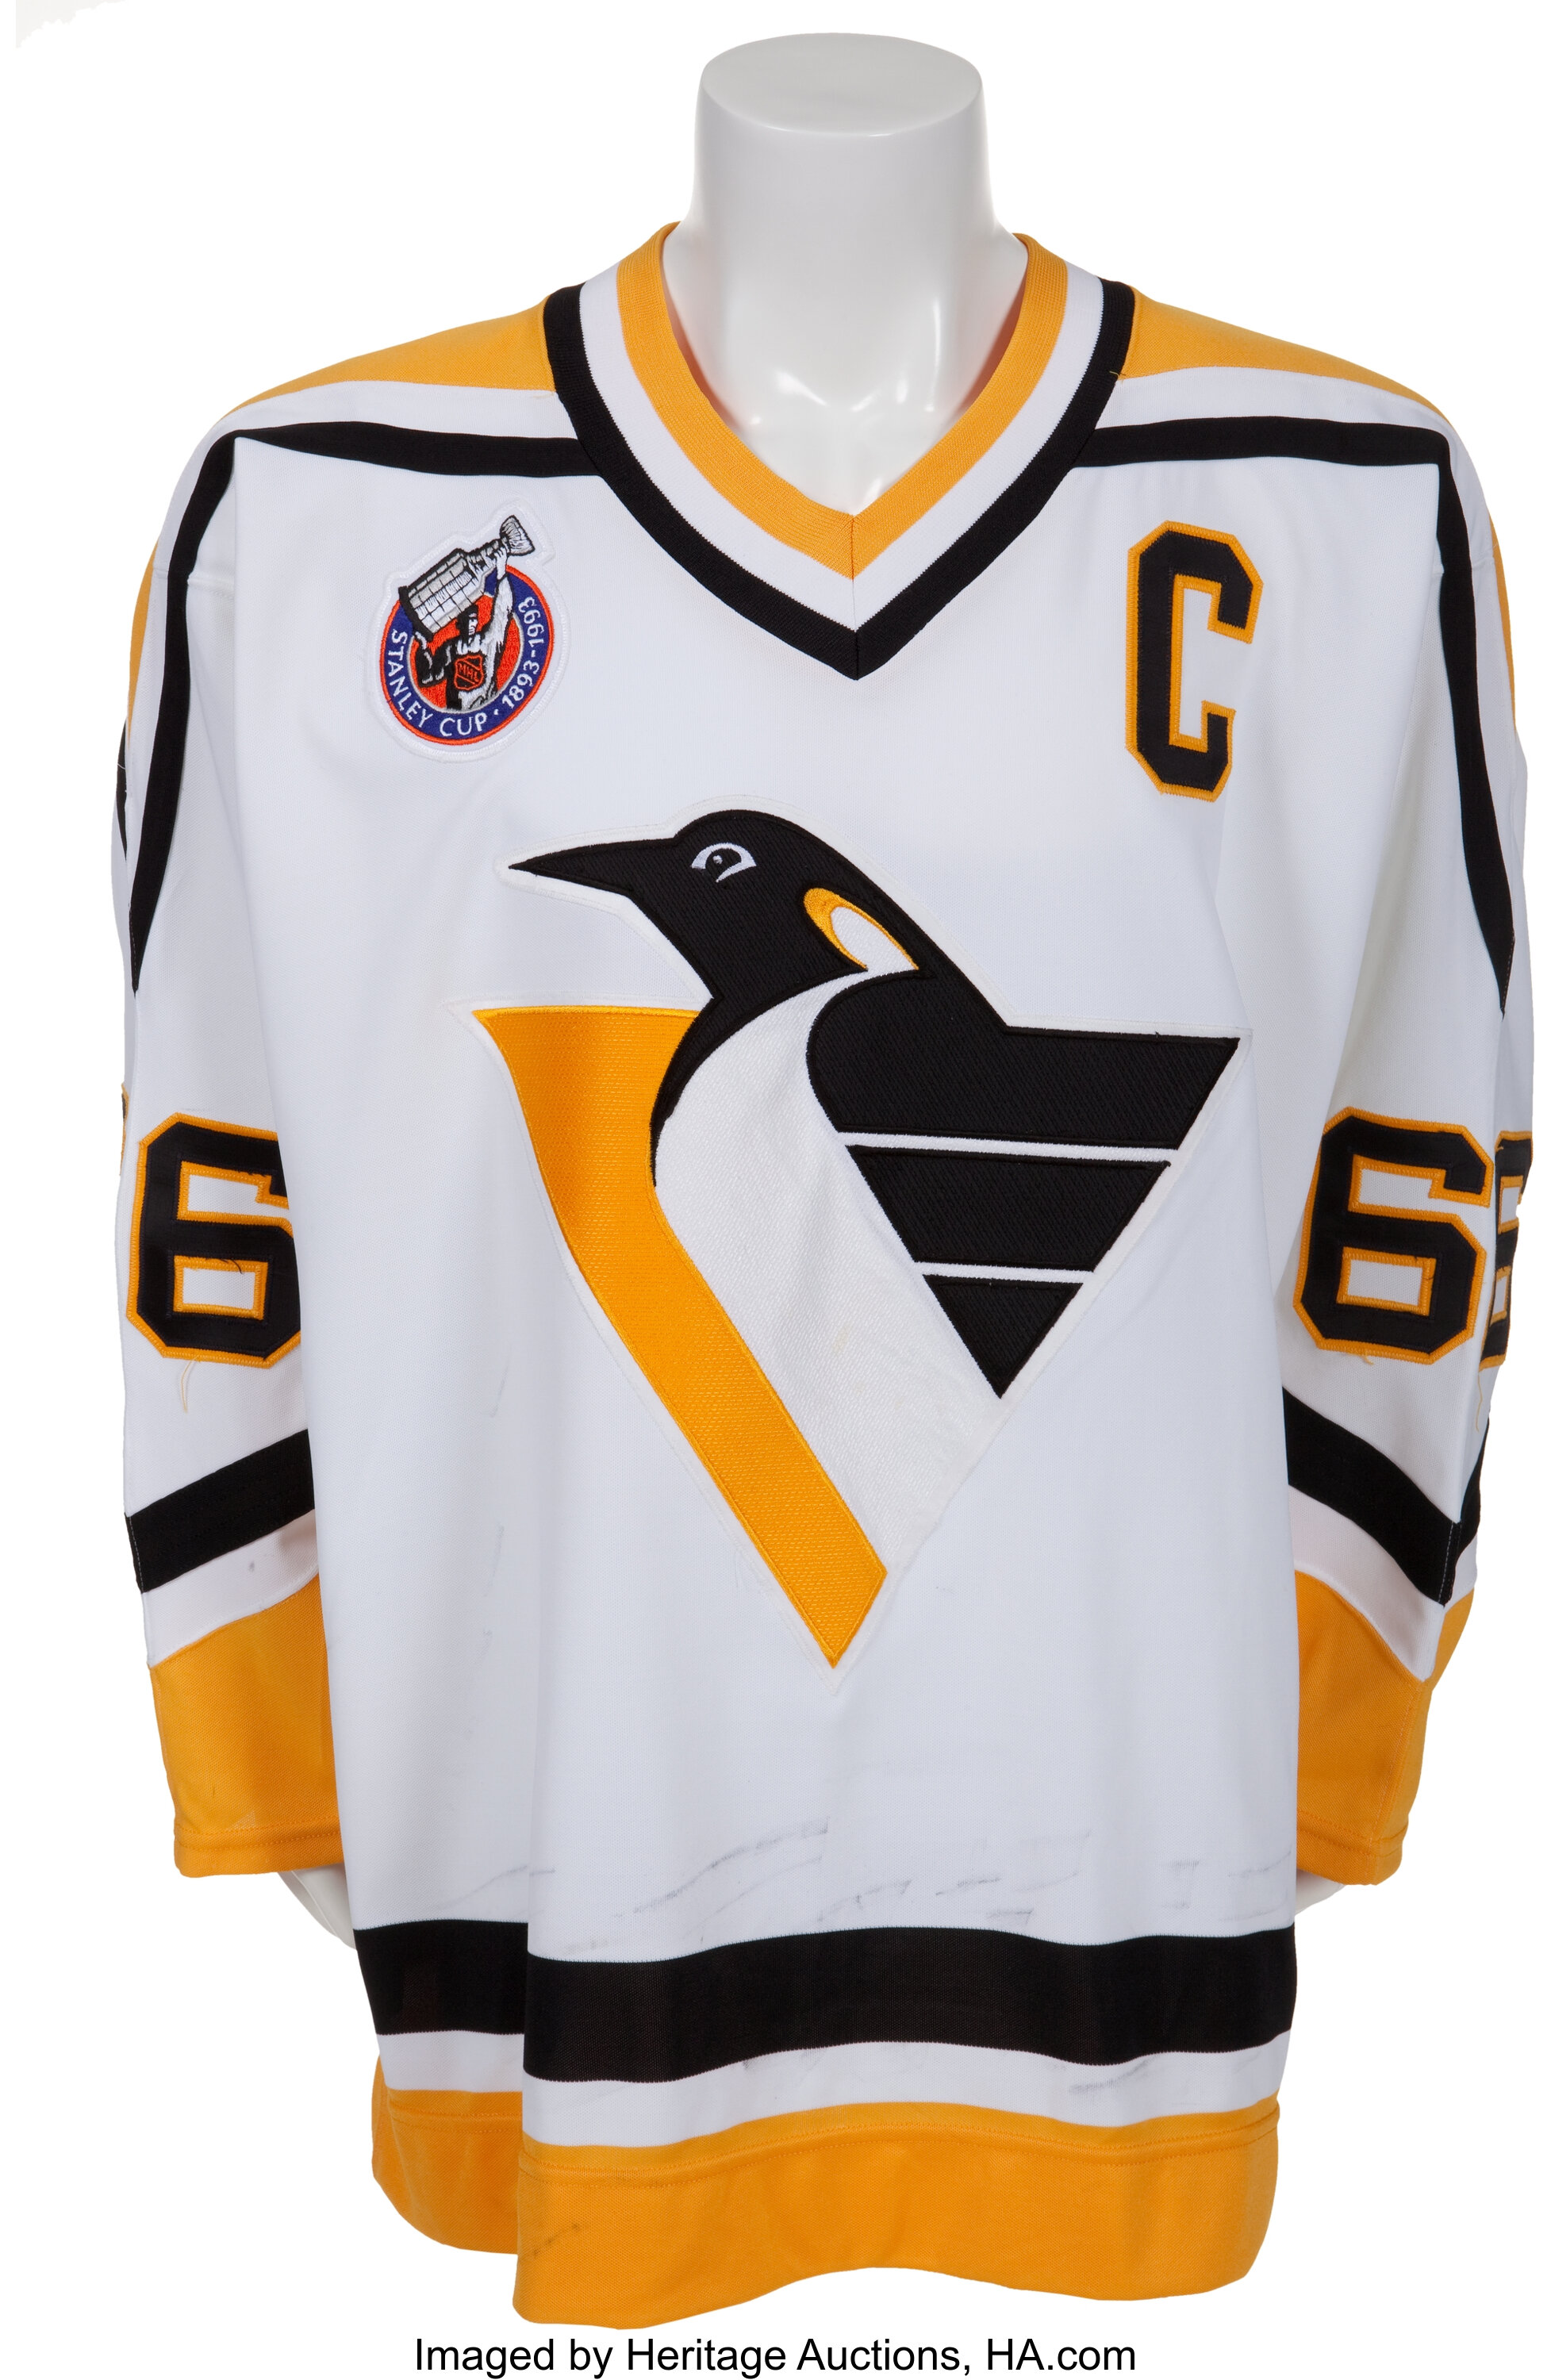 Mario Lemieux 1992-1993 authentic jersey for sale size 48! Asking 270 :  r/hockeyjerseys